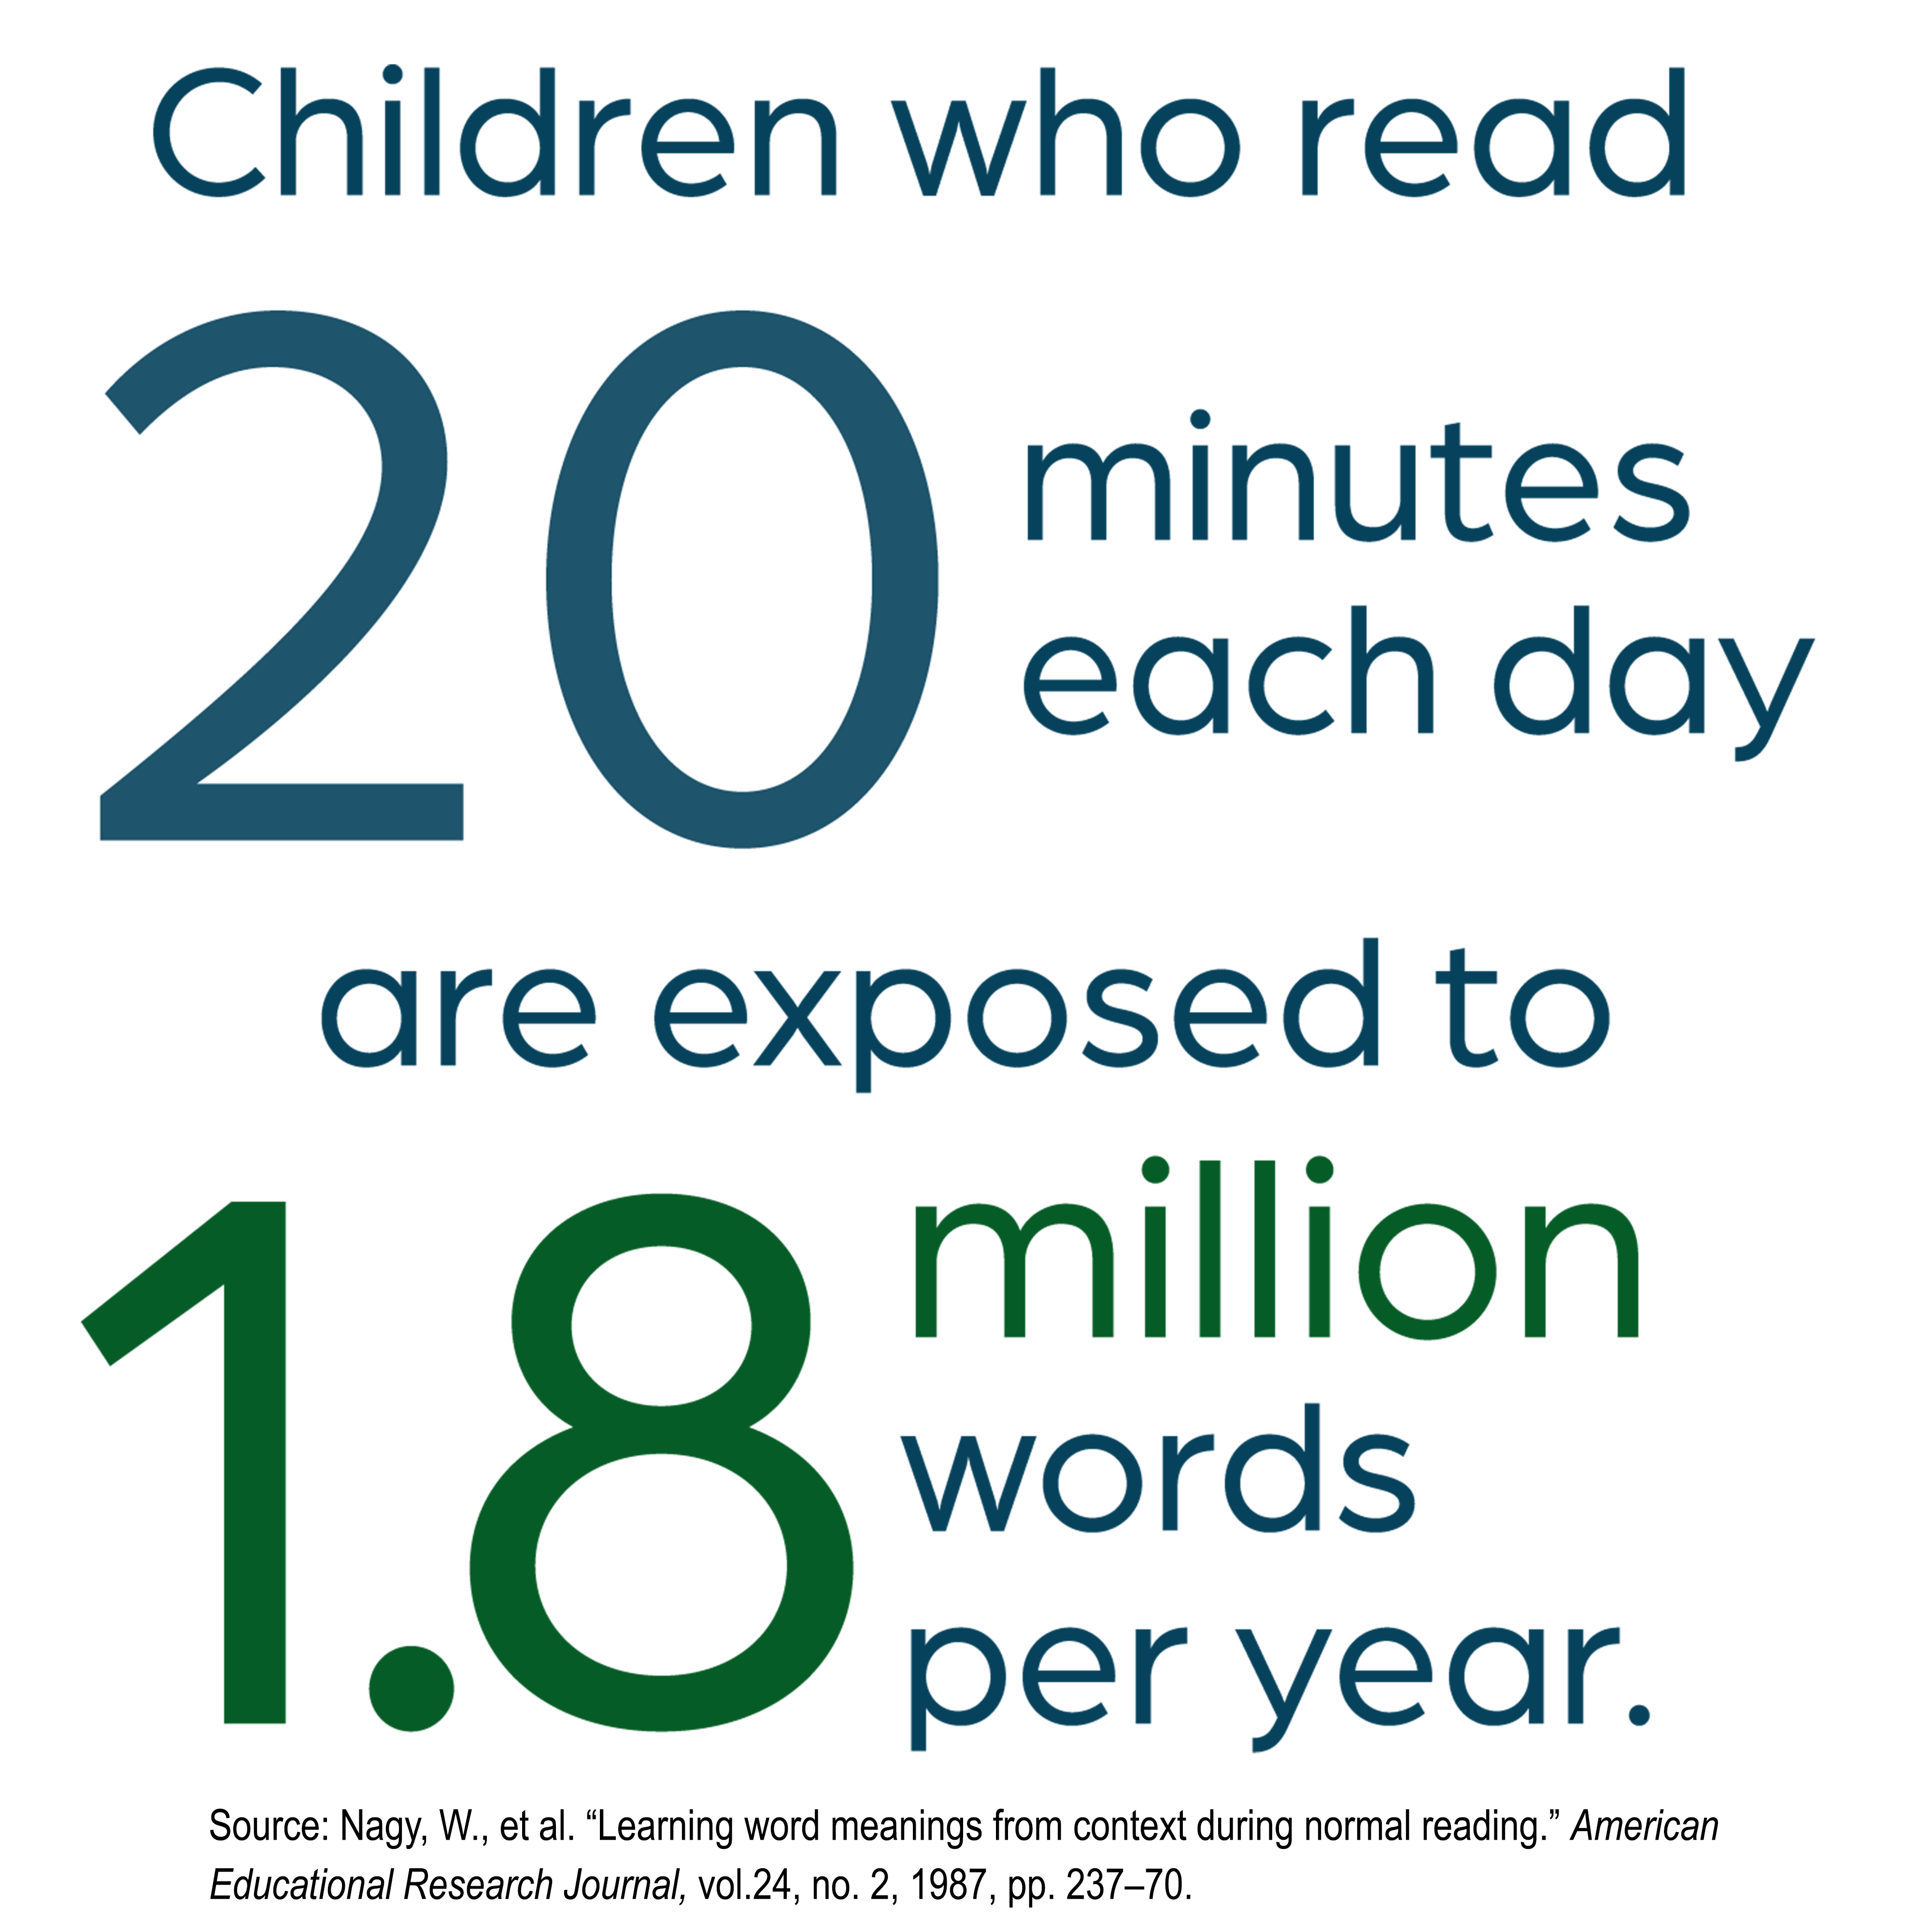 Children who read 20 minutes each dat are exposed to 1.8 million words per year